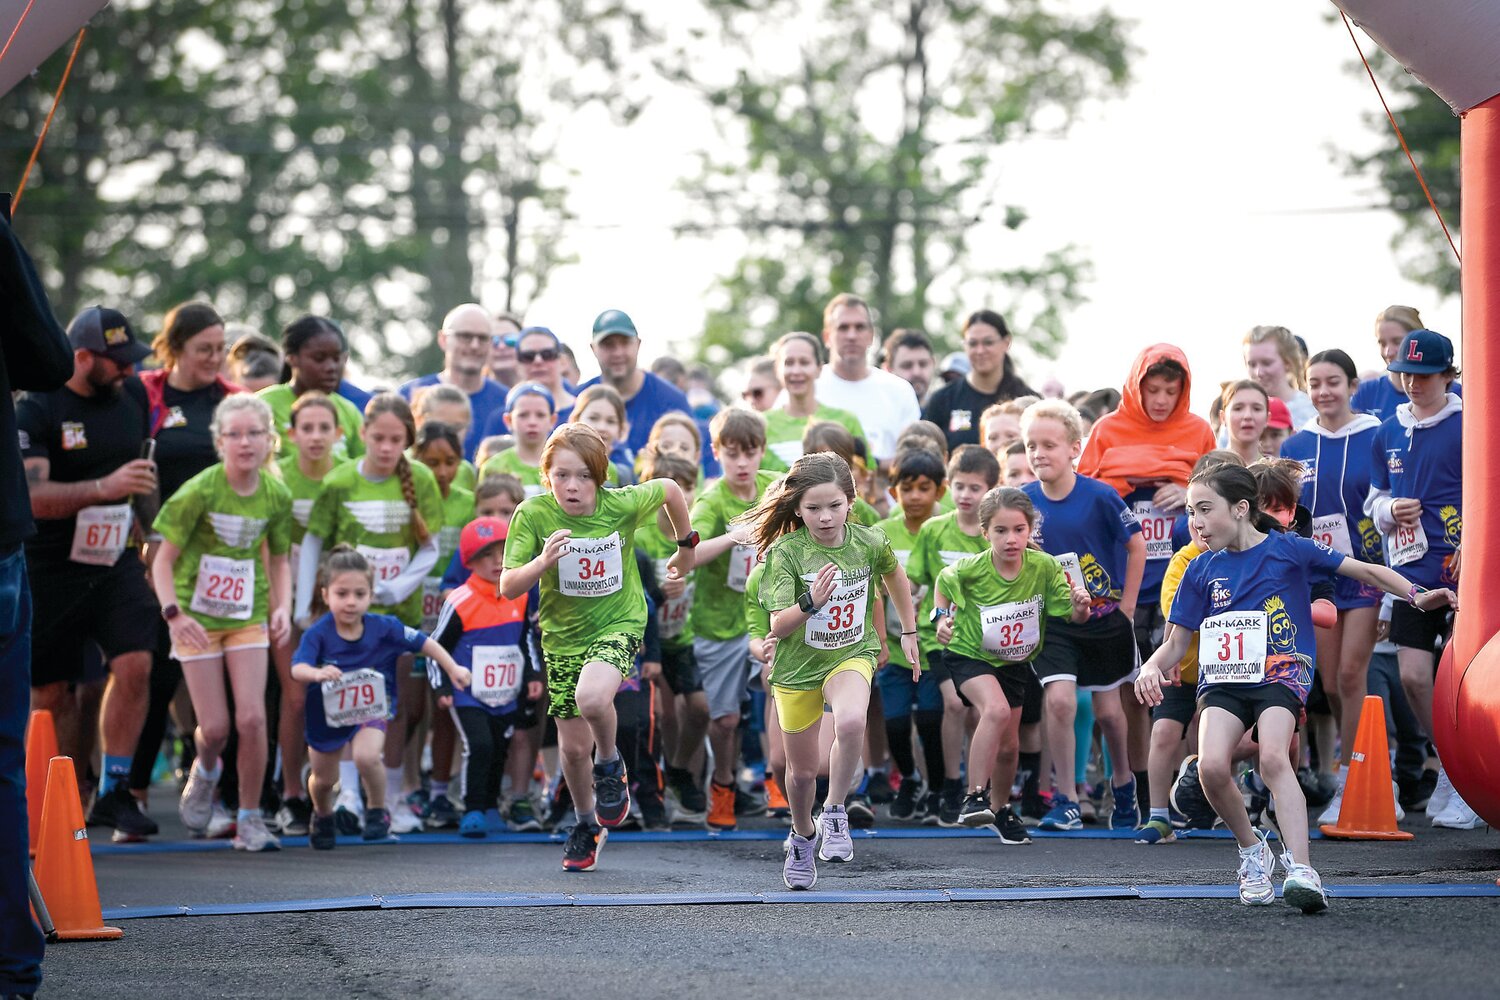 Kids sprint from the start line at the beginning of the 1-mile race.